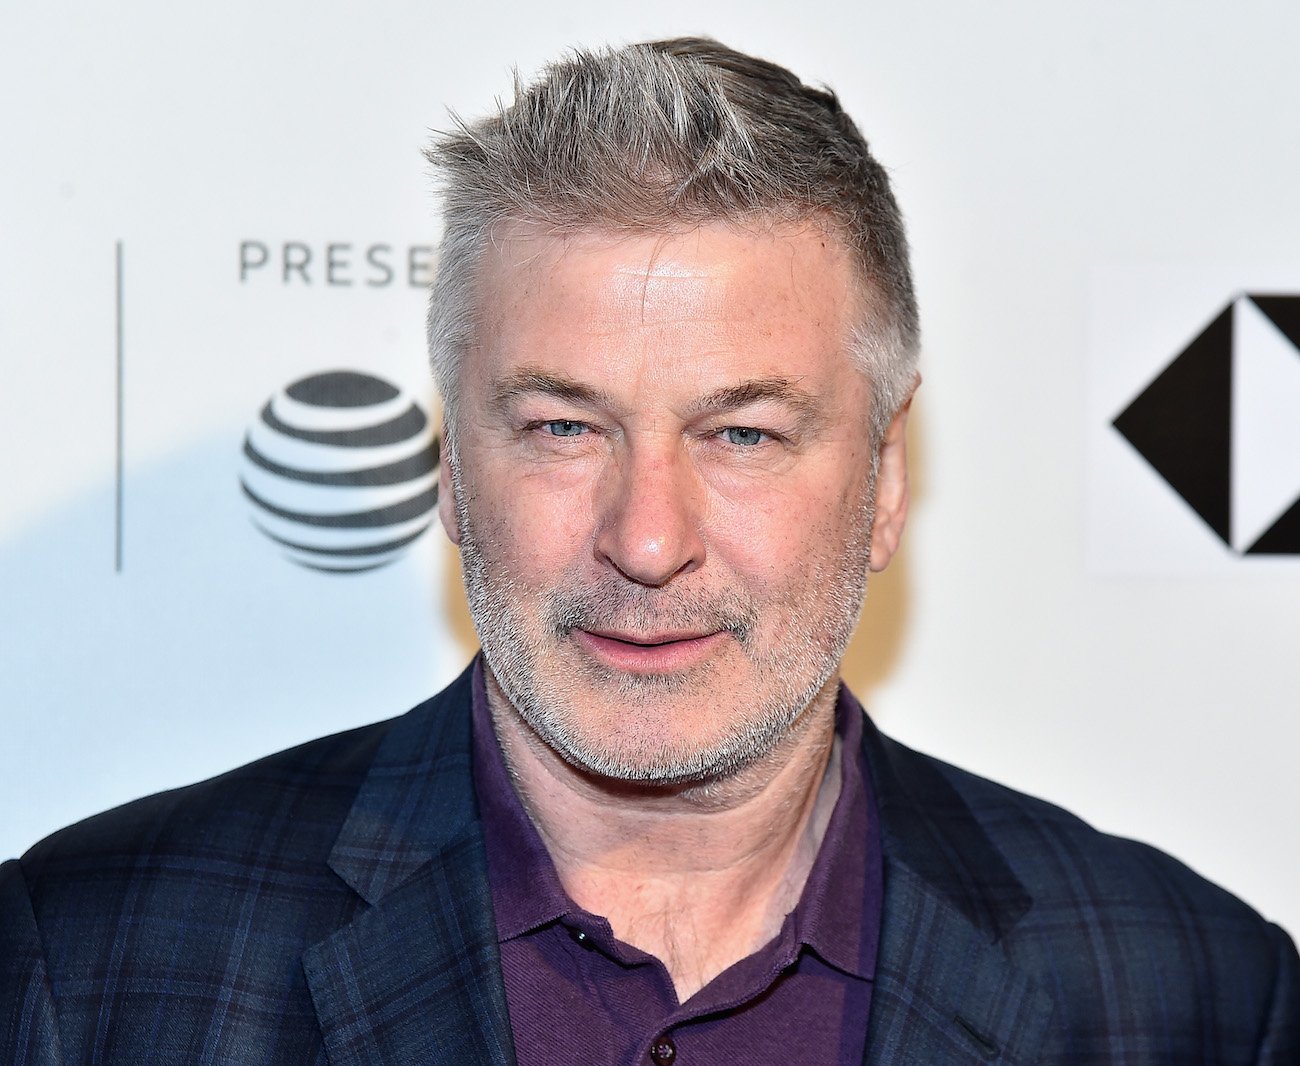 Alec Baldwin looking on in front of white background